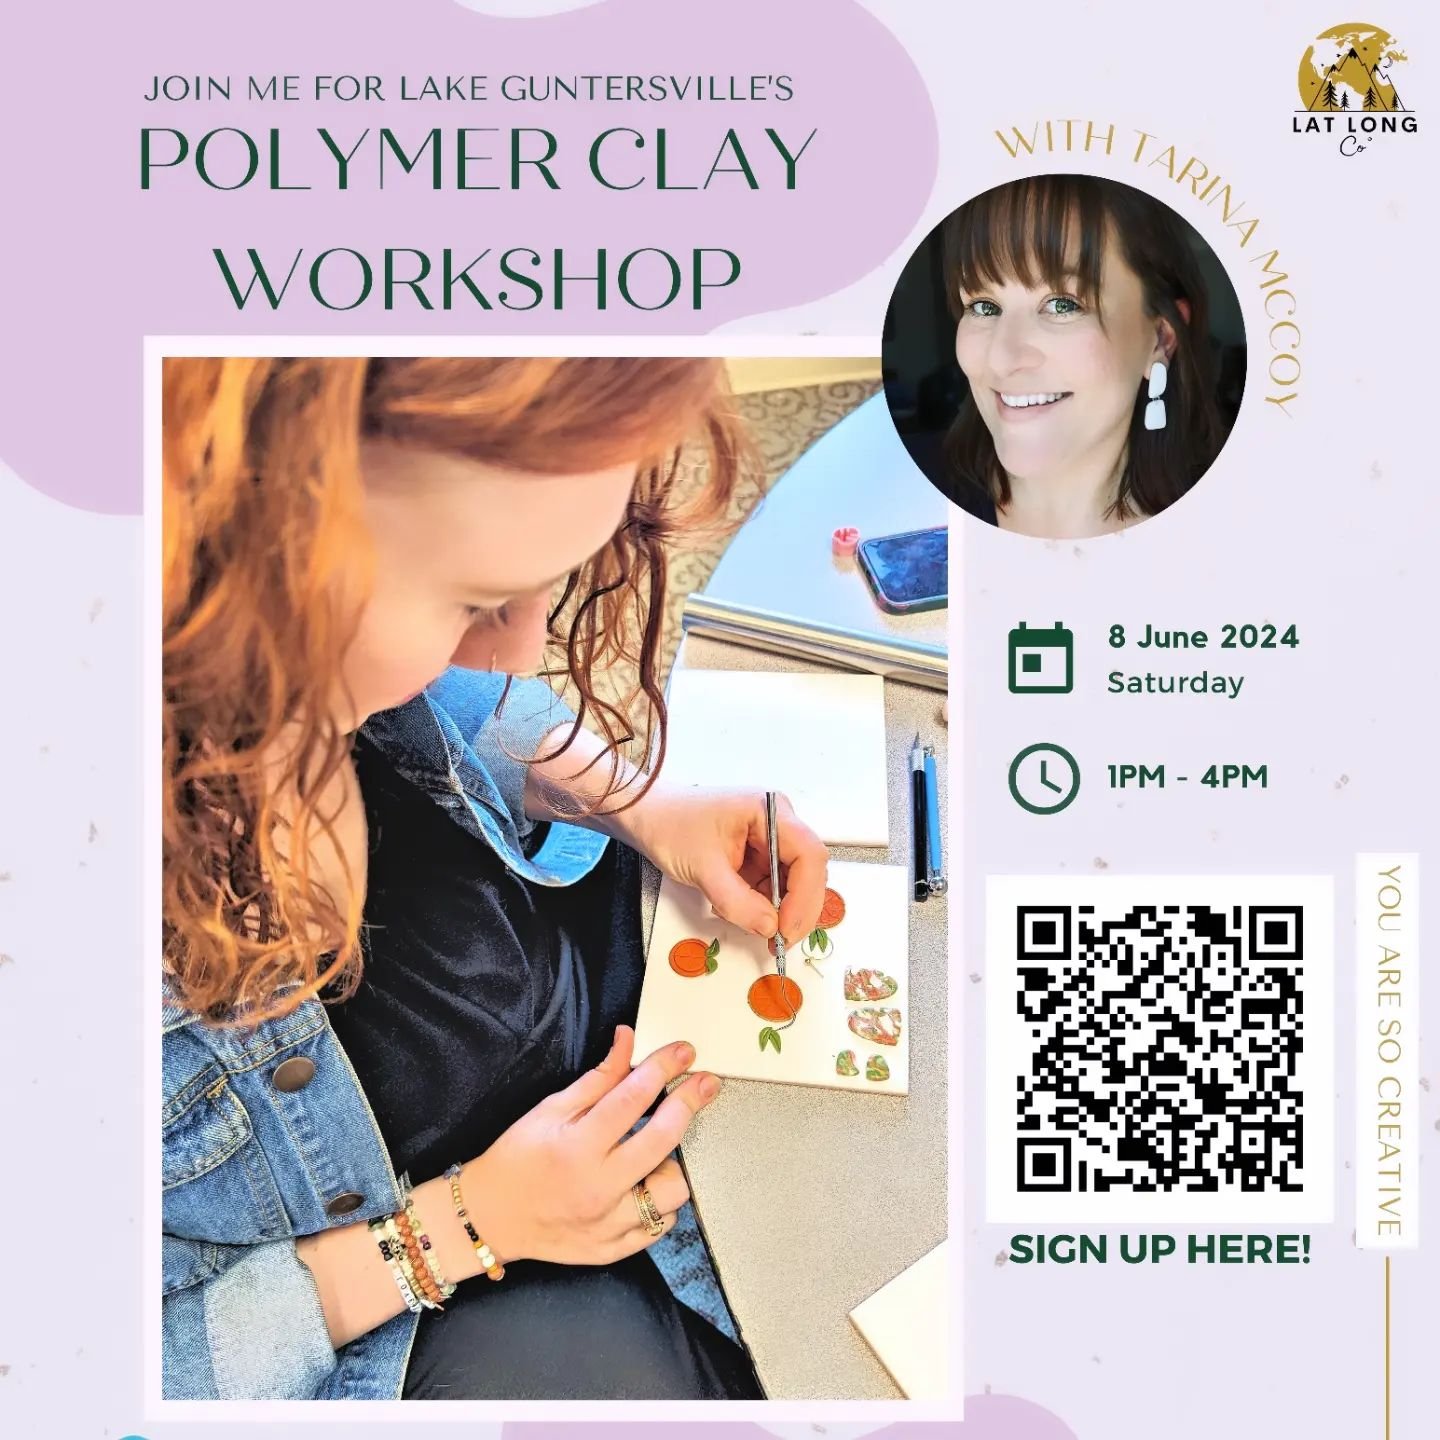 The first polymer clay workshop is happening in Guntersville, AL - Next month!! Come make, and then take 2 pairs of earrings with you!

There are only 10 spots in total and only a few left! - so grab them quick! 

I would absolutely love it if you wo